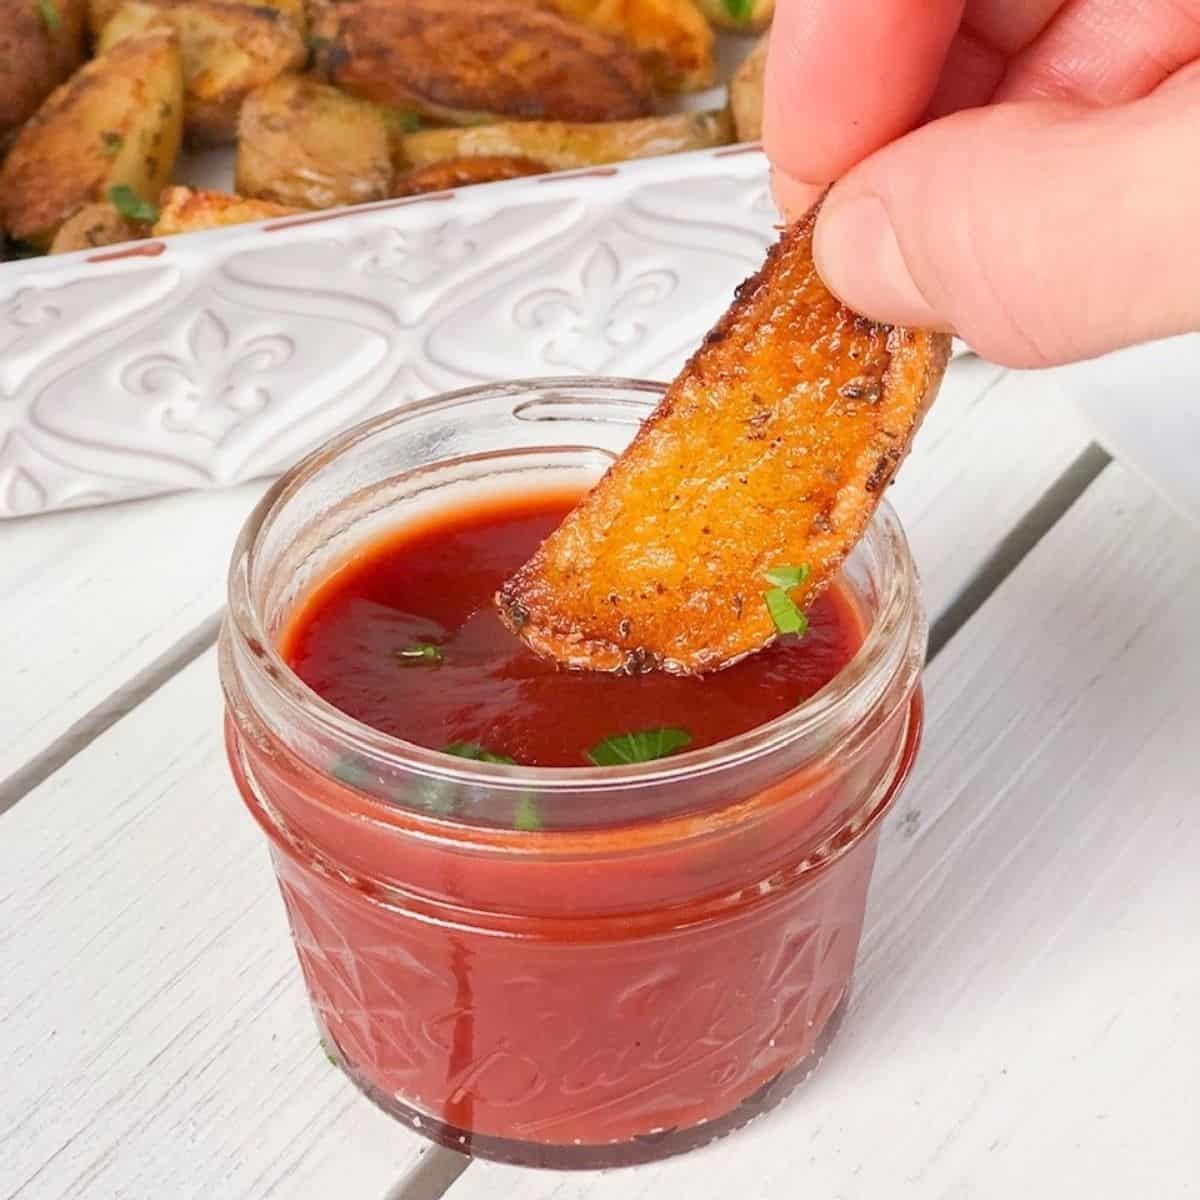 Crispy baked potato wedge being dipped into ketchup.